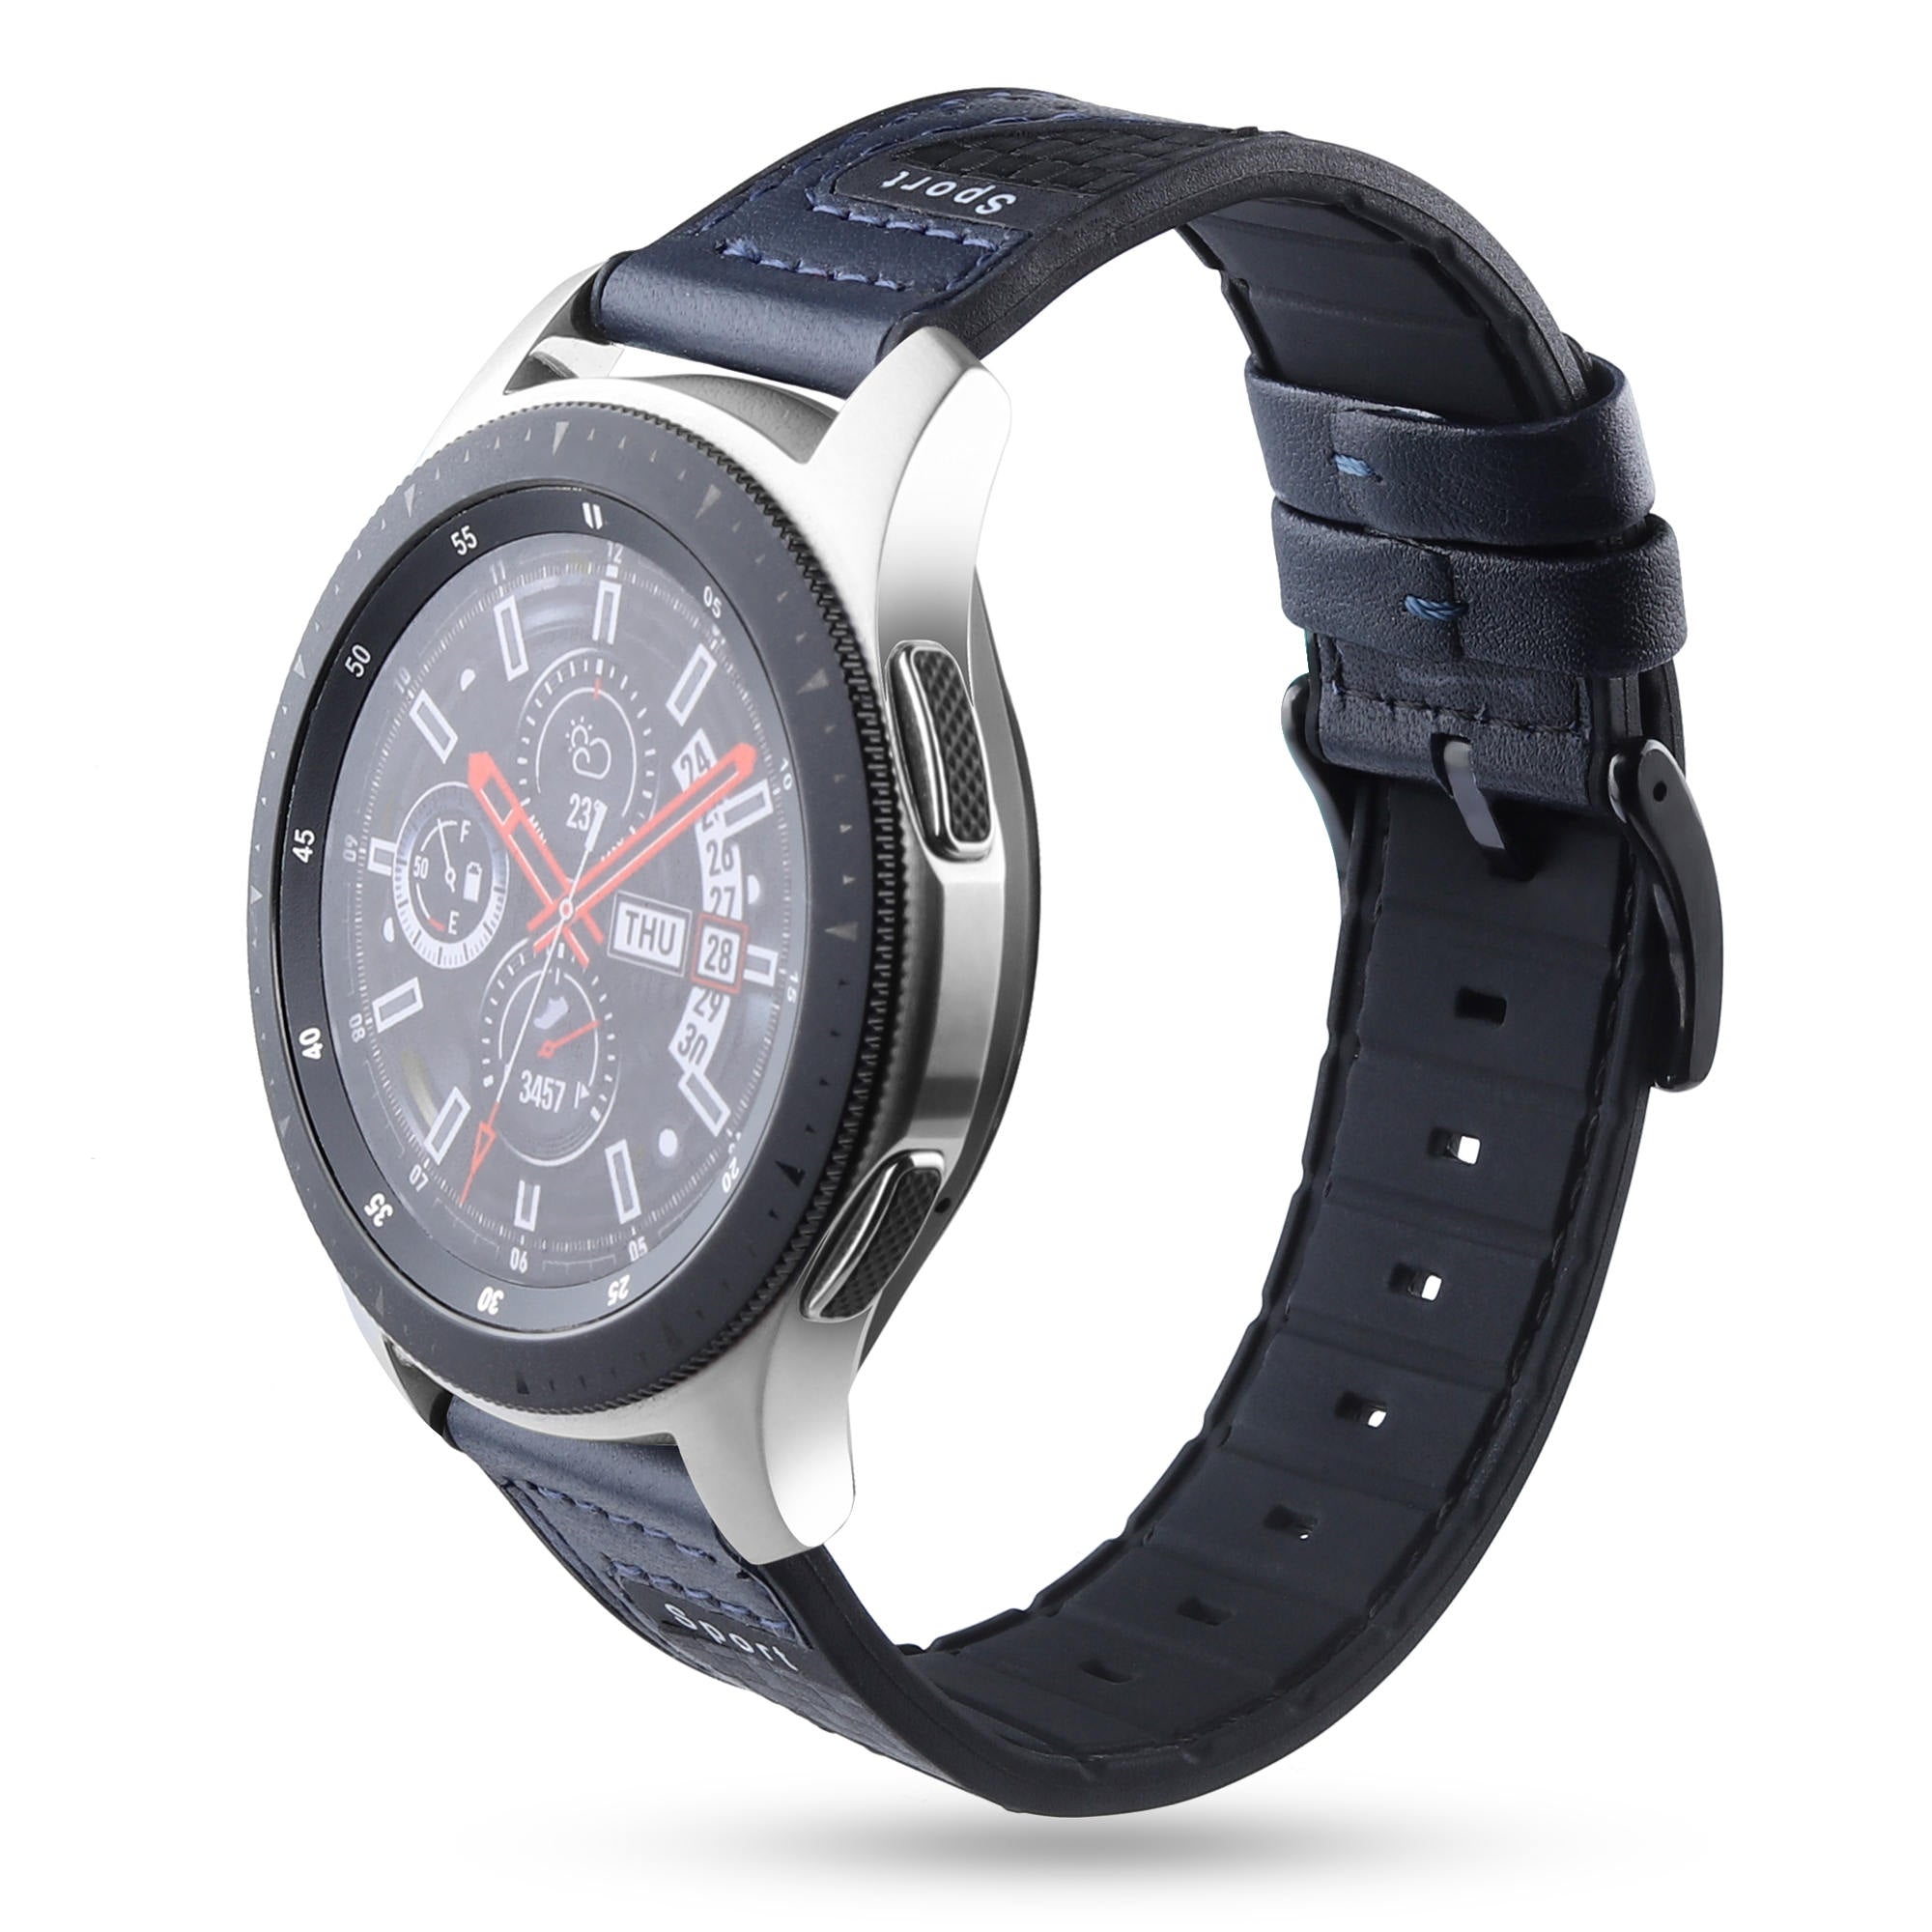 22mm Carbon Fiber Leather Coated Silicone Watch Strap for Huawei Watch GT2/Galaxy Watch 46mm etc. - Dark Blue